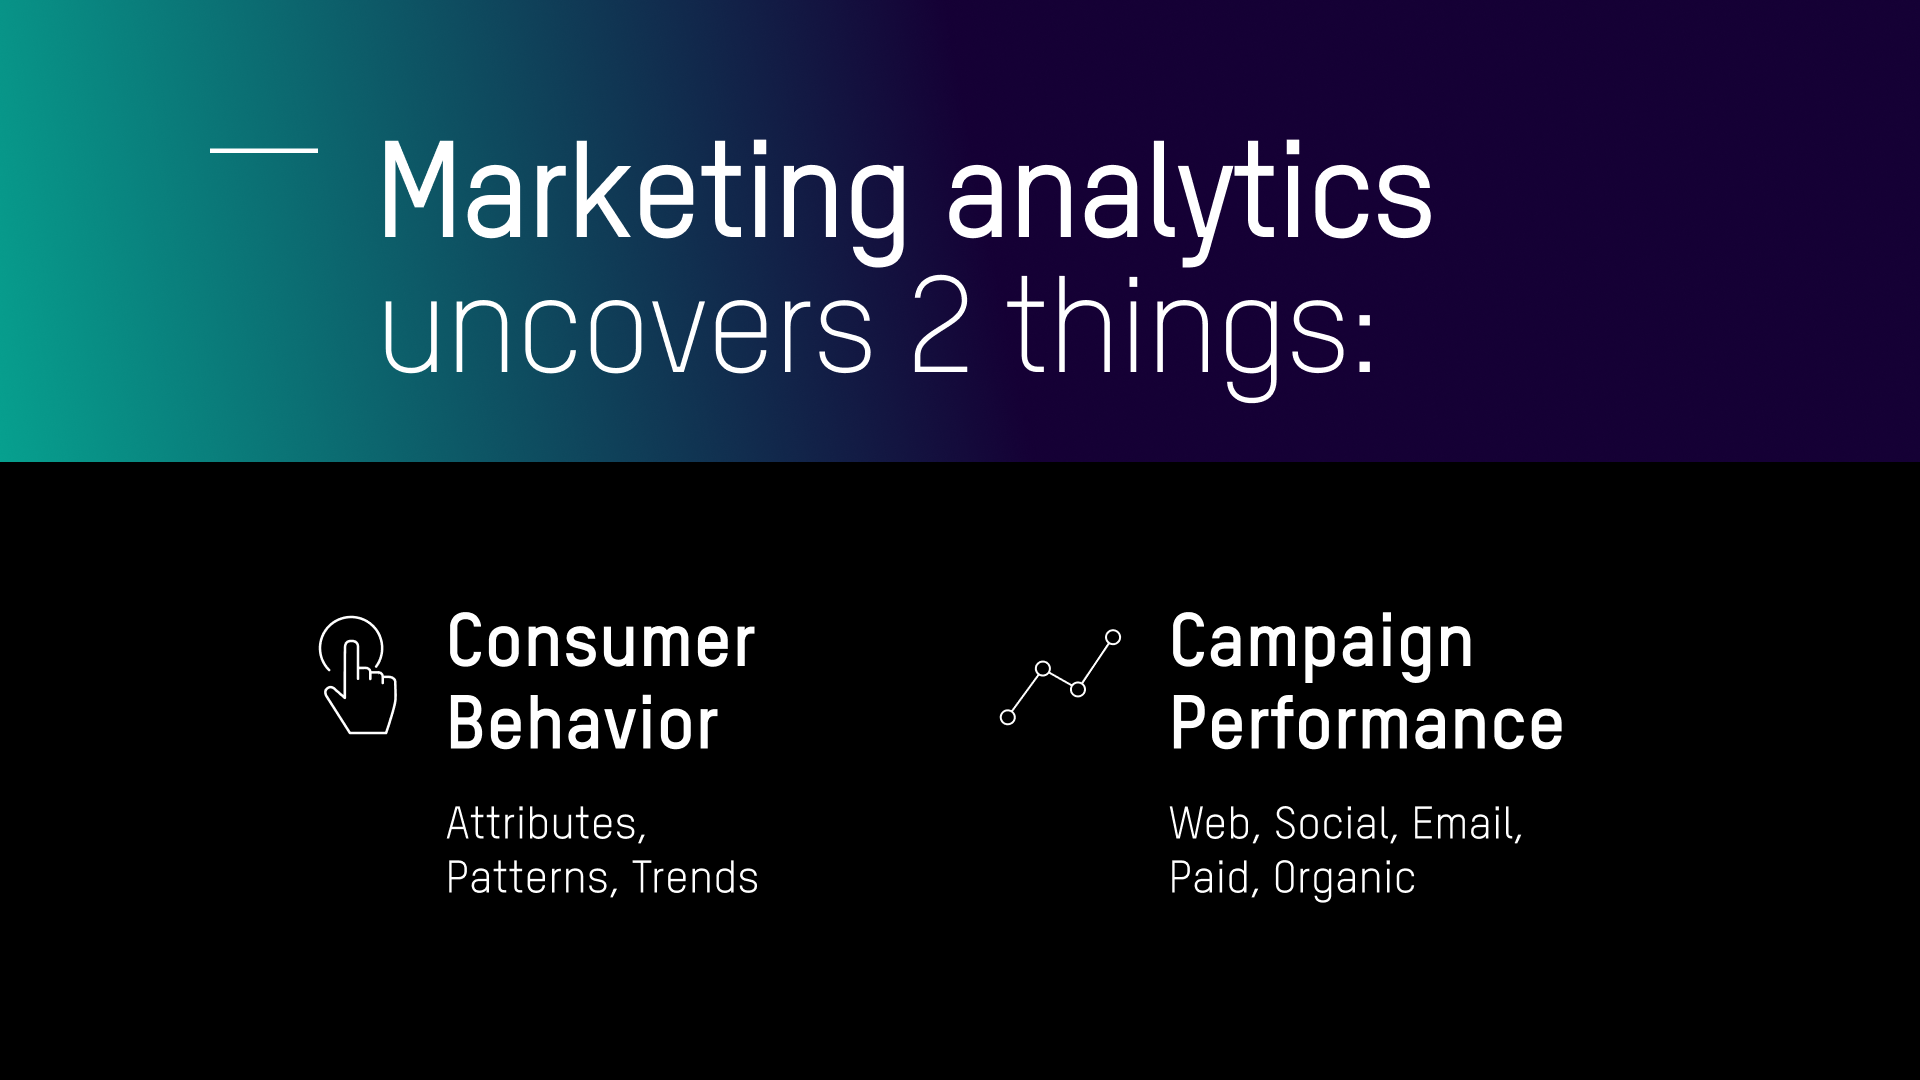 Marketing analytics uncover 2 things